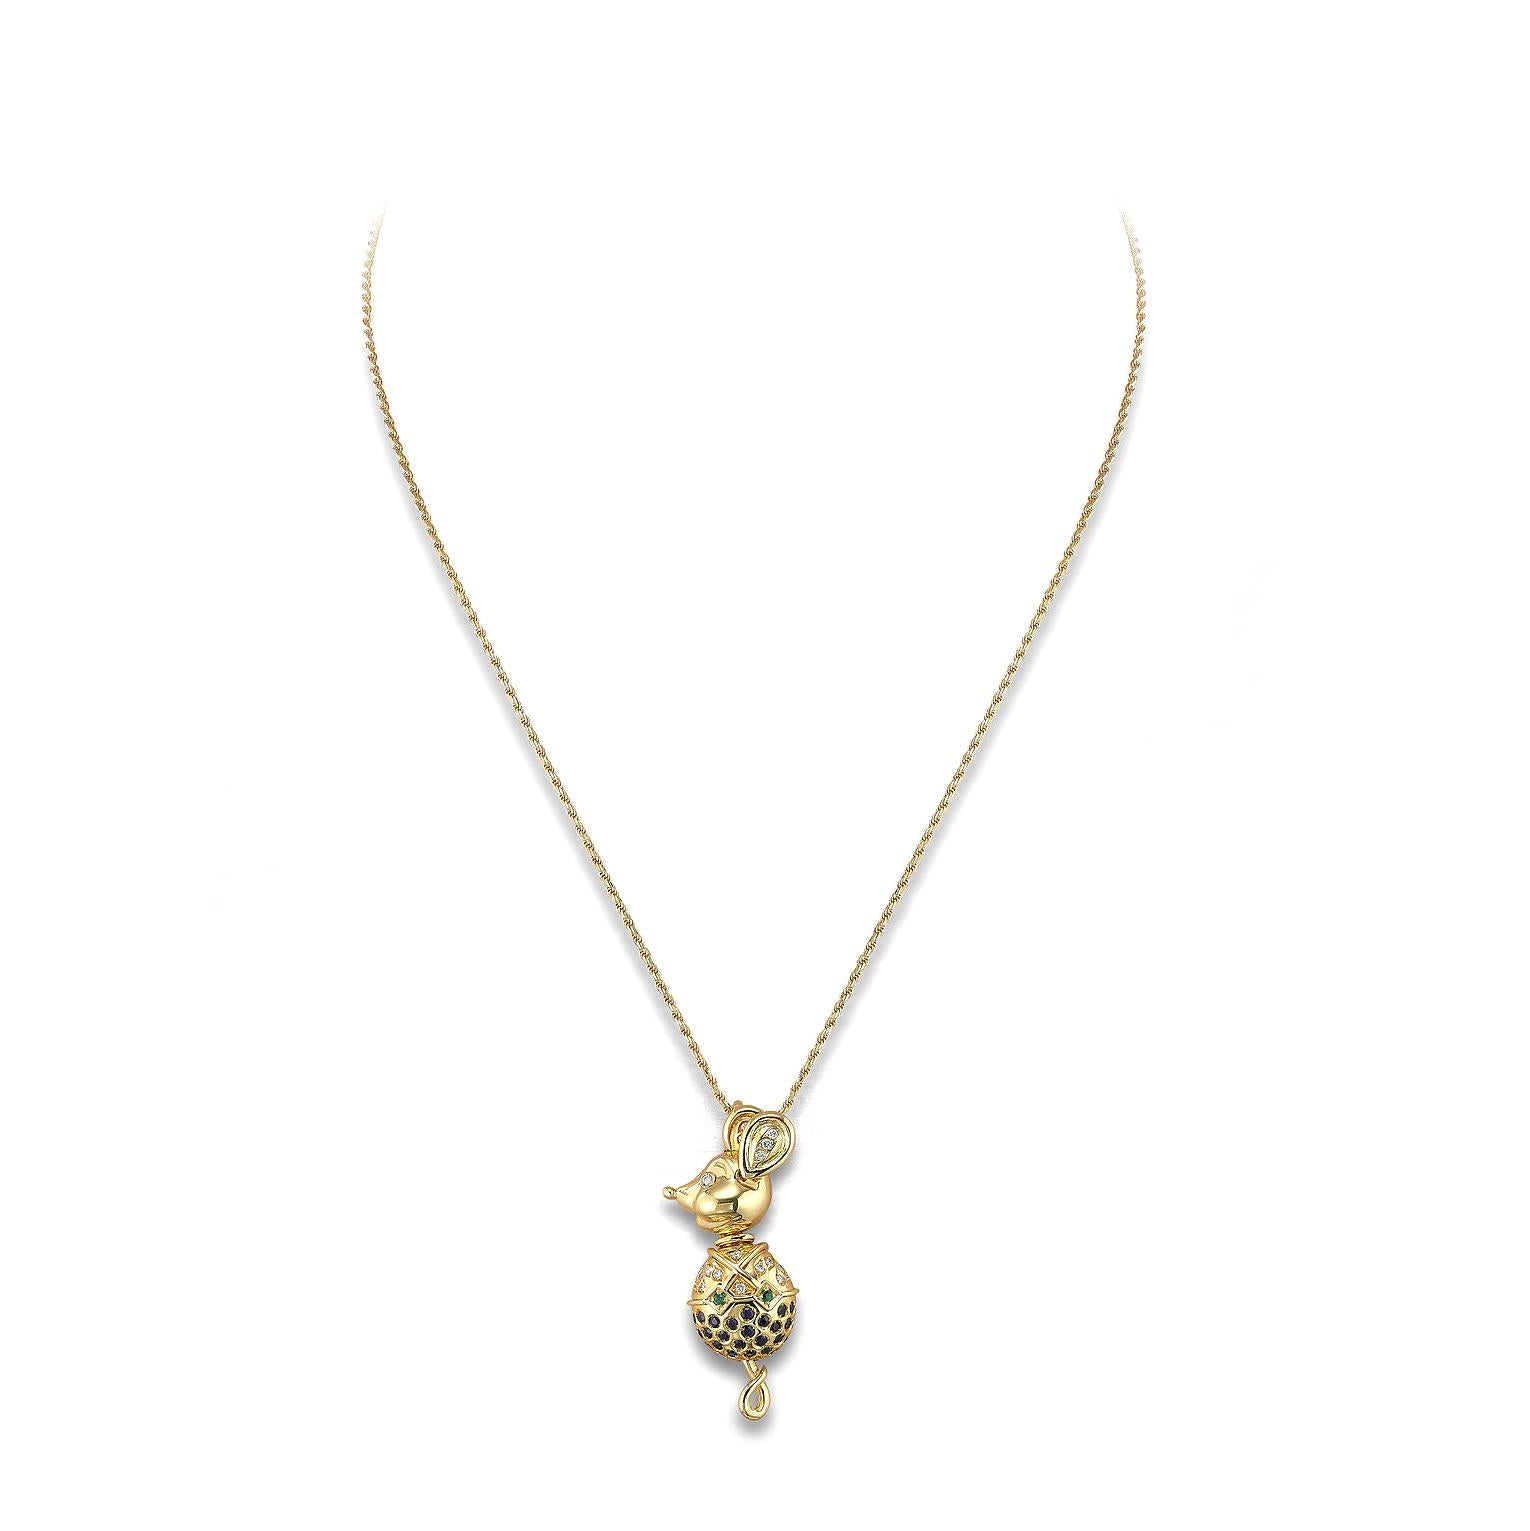 Mouse pendant in 18kt yellow gold set with emerald 0.04 cts, 20 diamonds 0.24 cts and 27 sapphires 